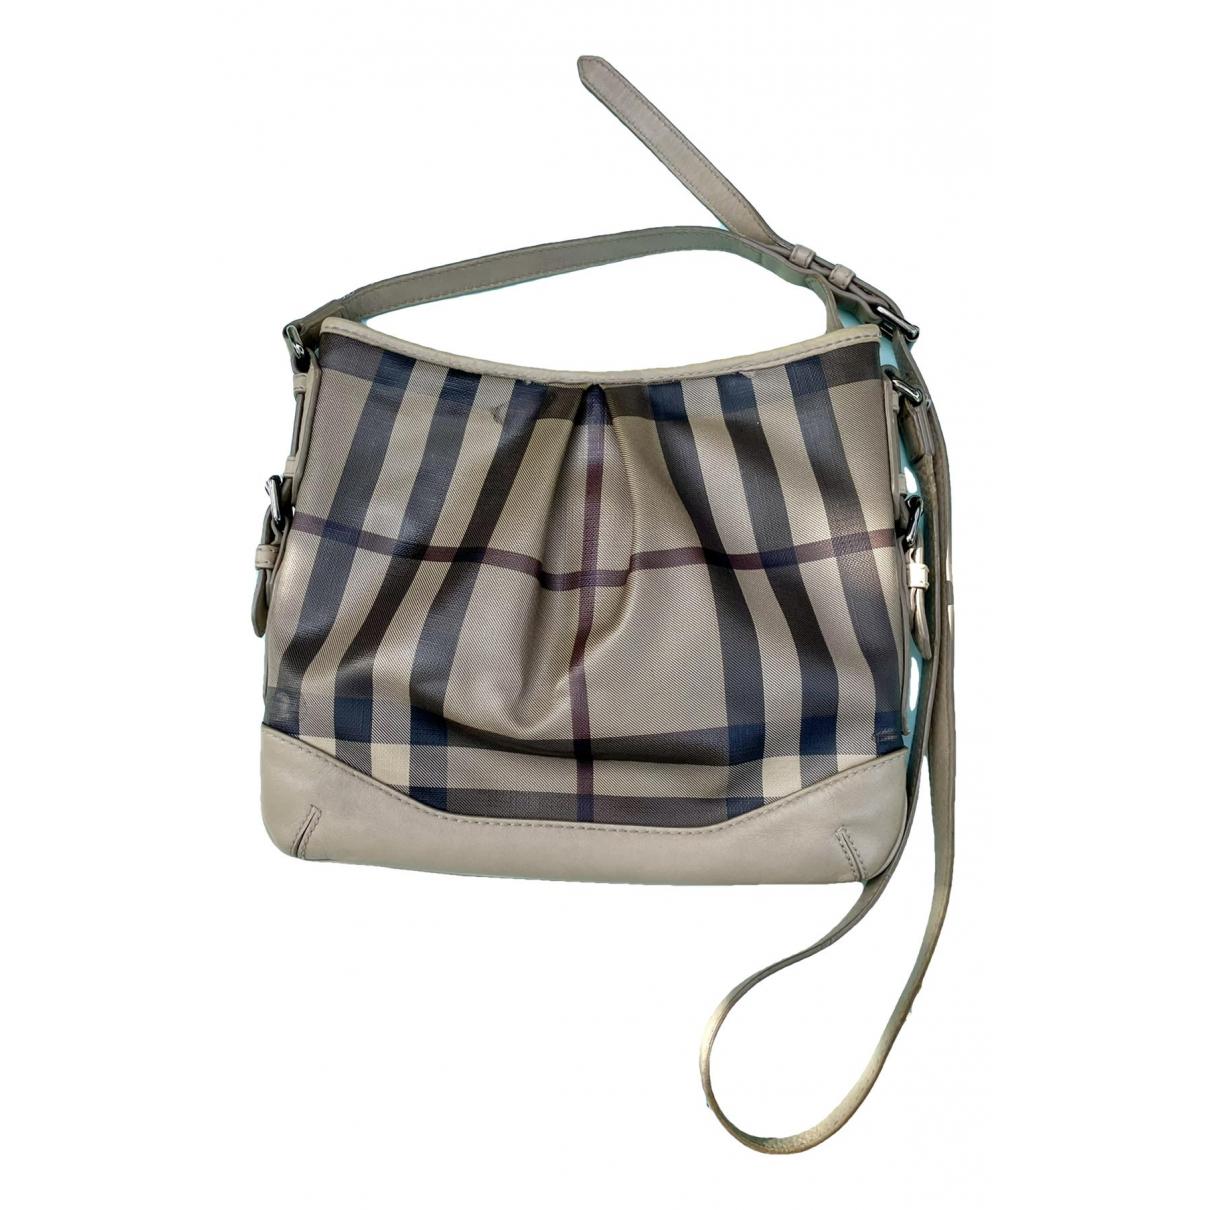 Vintage Burberry bag  Buy or Sell crossbody bags for women - Vestiaire  Collective